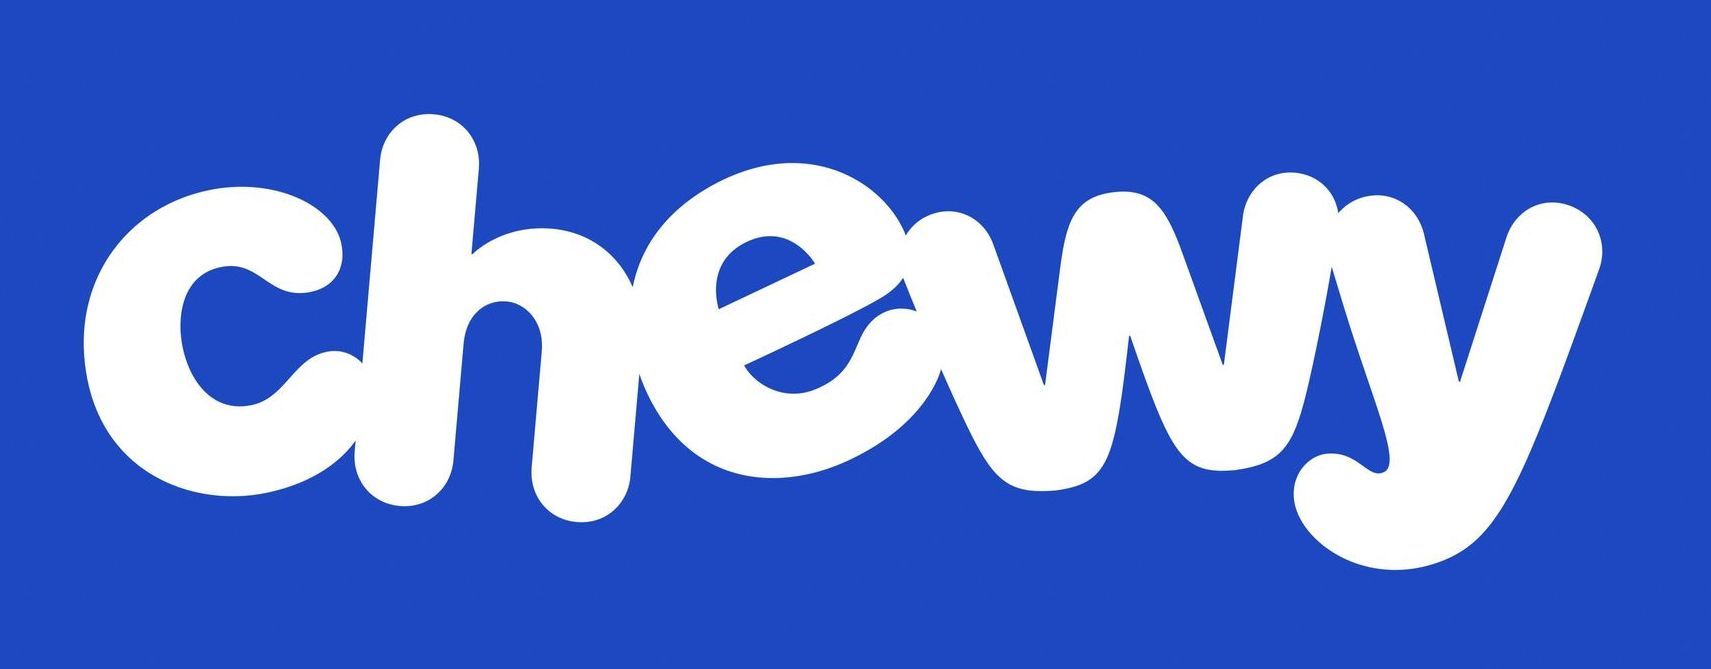 The word chewy is written in white on a blue background.